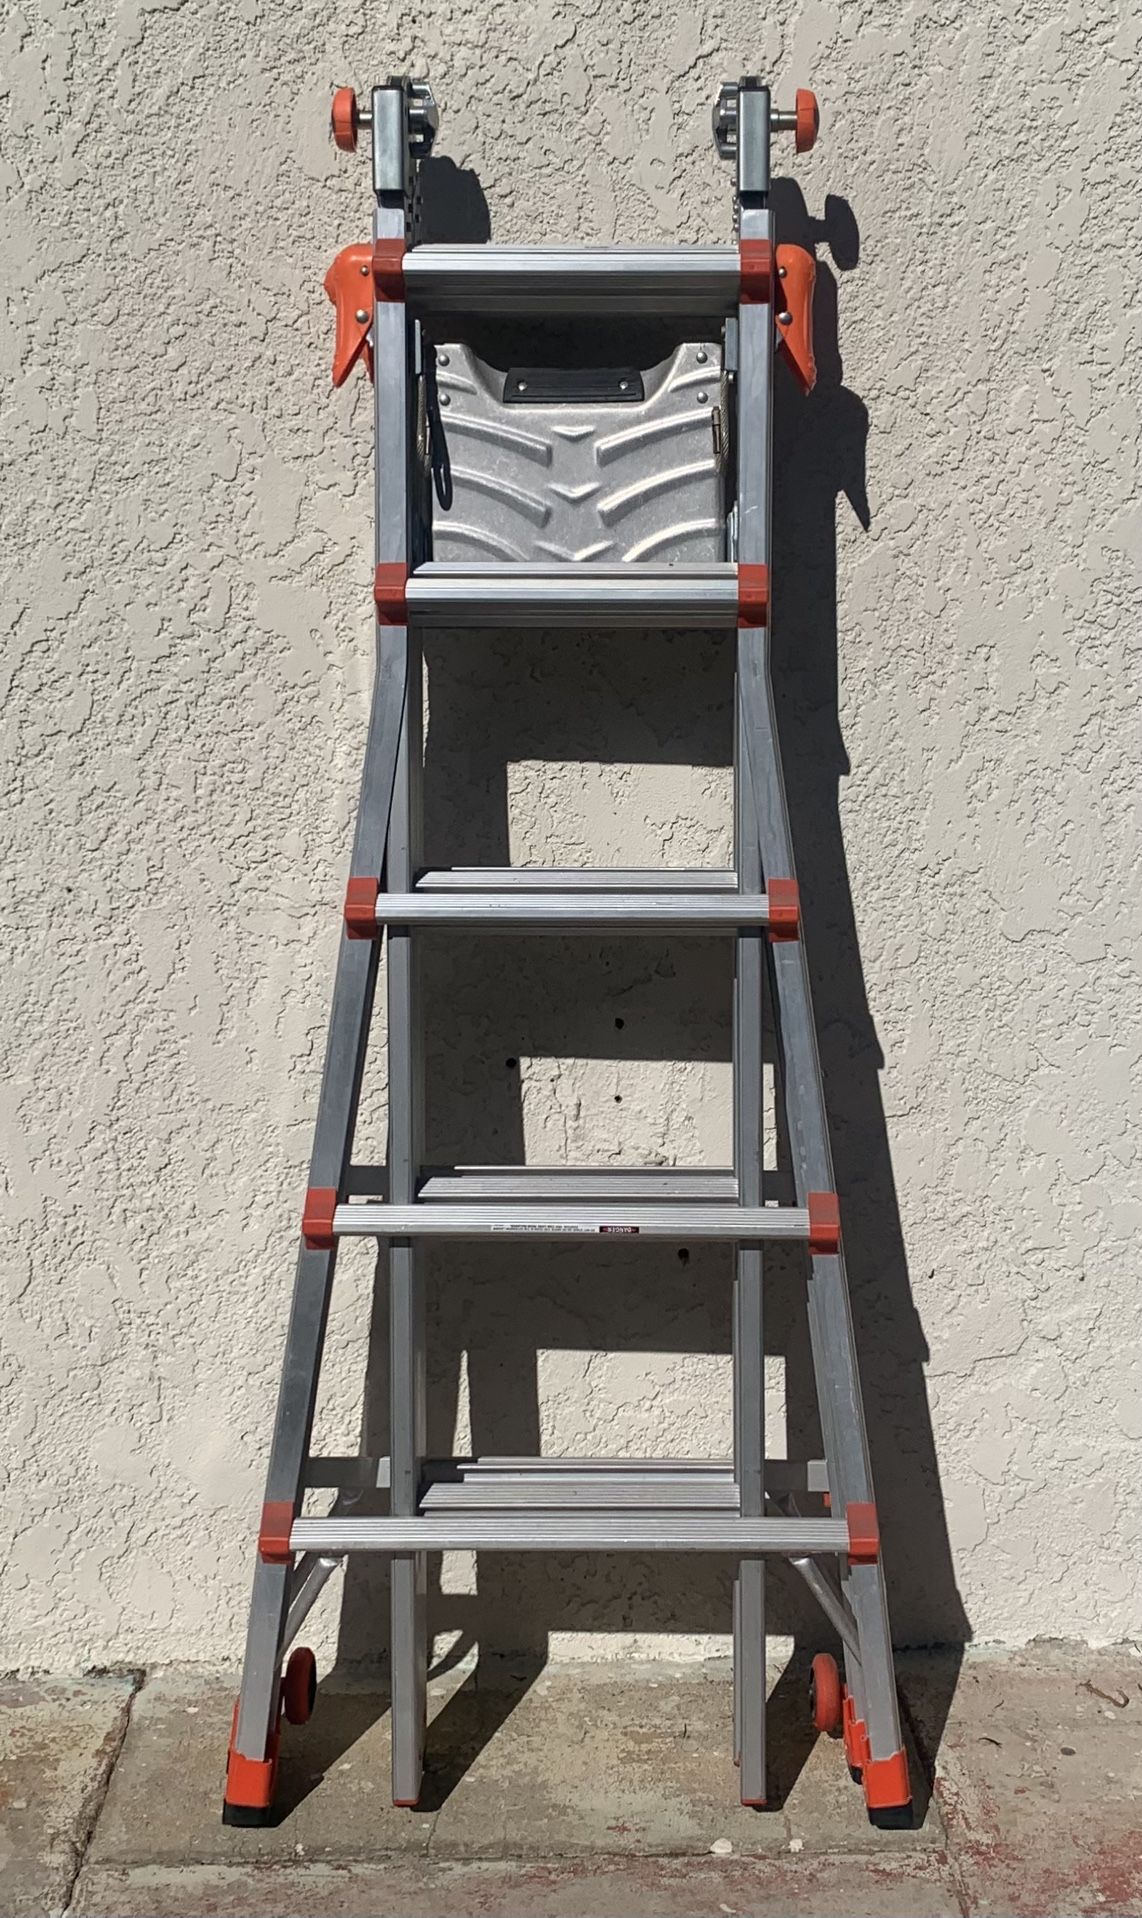 Little Giant XTREME 300lbs Model 22 1A Articulated Extendable Ladder w/ Wheels PLUS Accessories